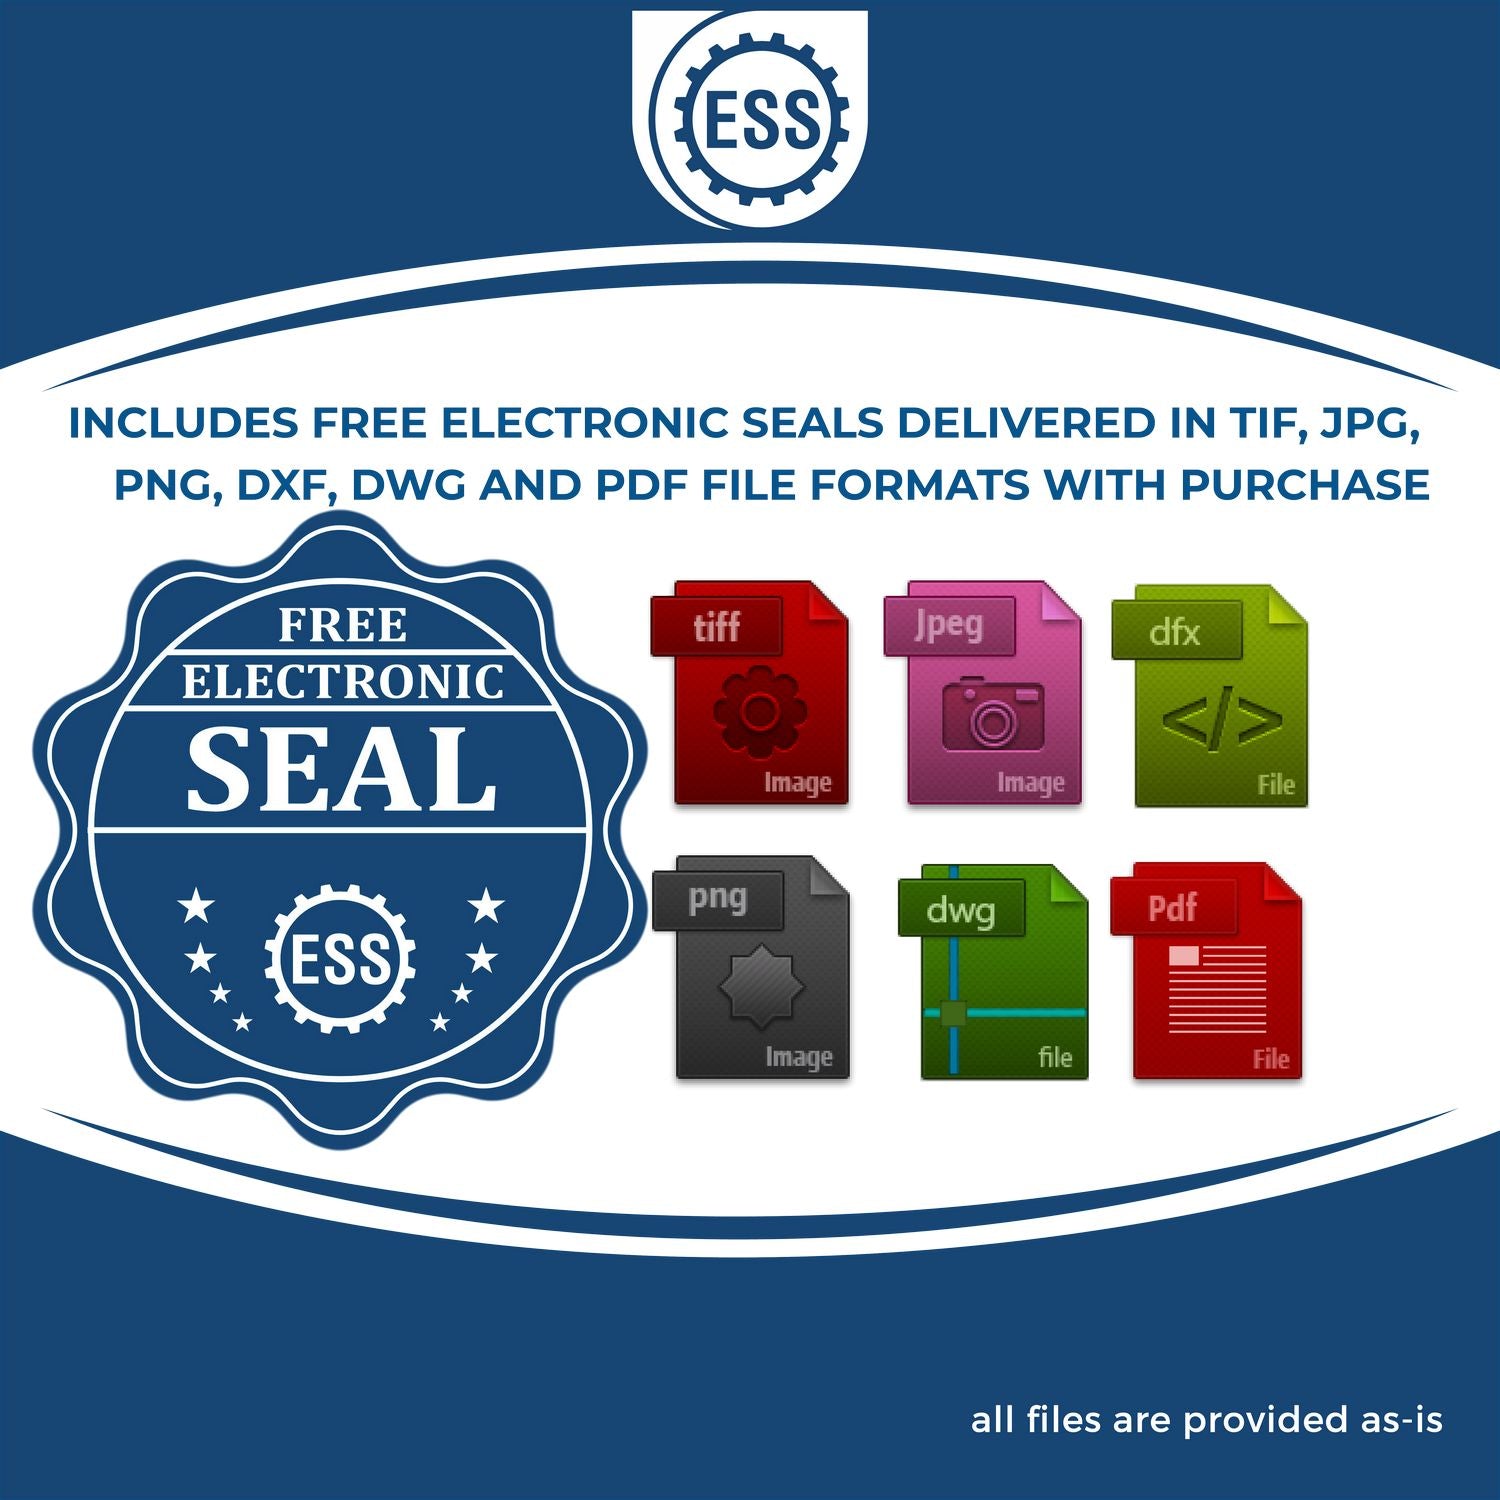 An infographic for the free electronic seal for the Heavy Duty Cast Iron Tennessee Land Surveyor Seal Embosser illustrating the different file type icons such as DXF, DWG, TIF, JPG and PNG.